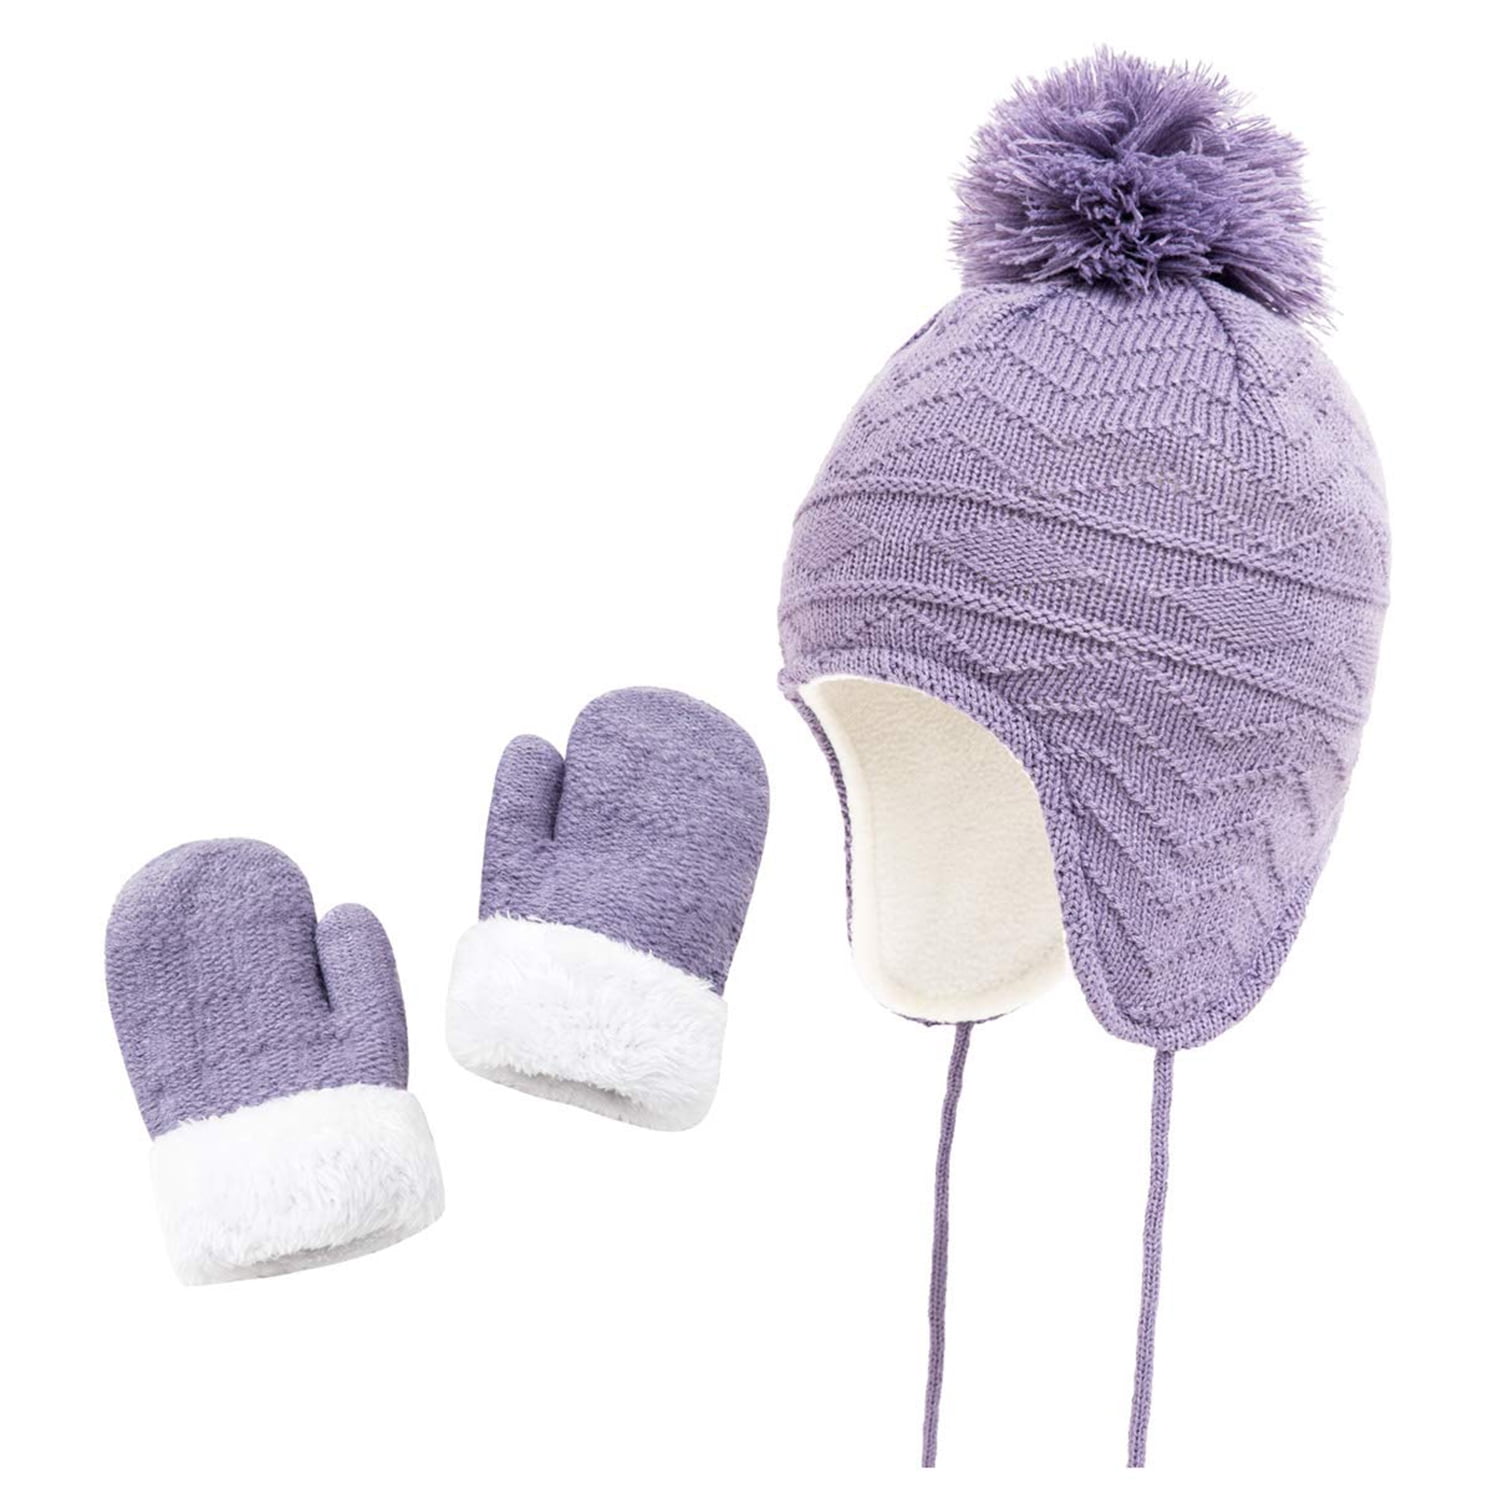 Winter Baby Hat and Gloves Set Knit Baby Earflap Hat Warm Fleece Mittens for Baby Boys and Girls 